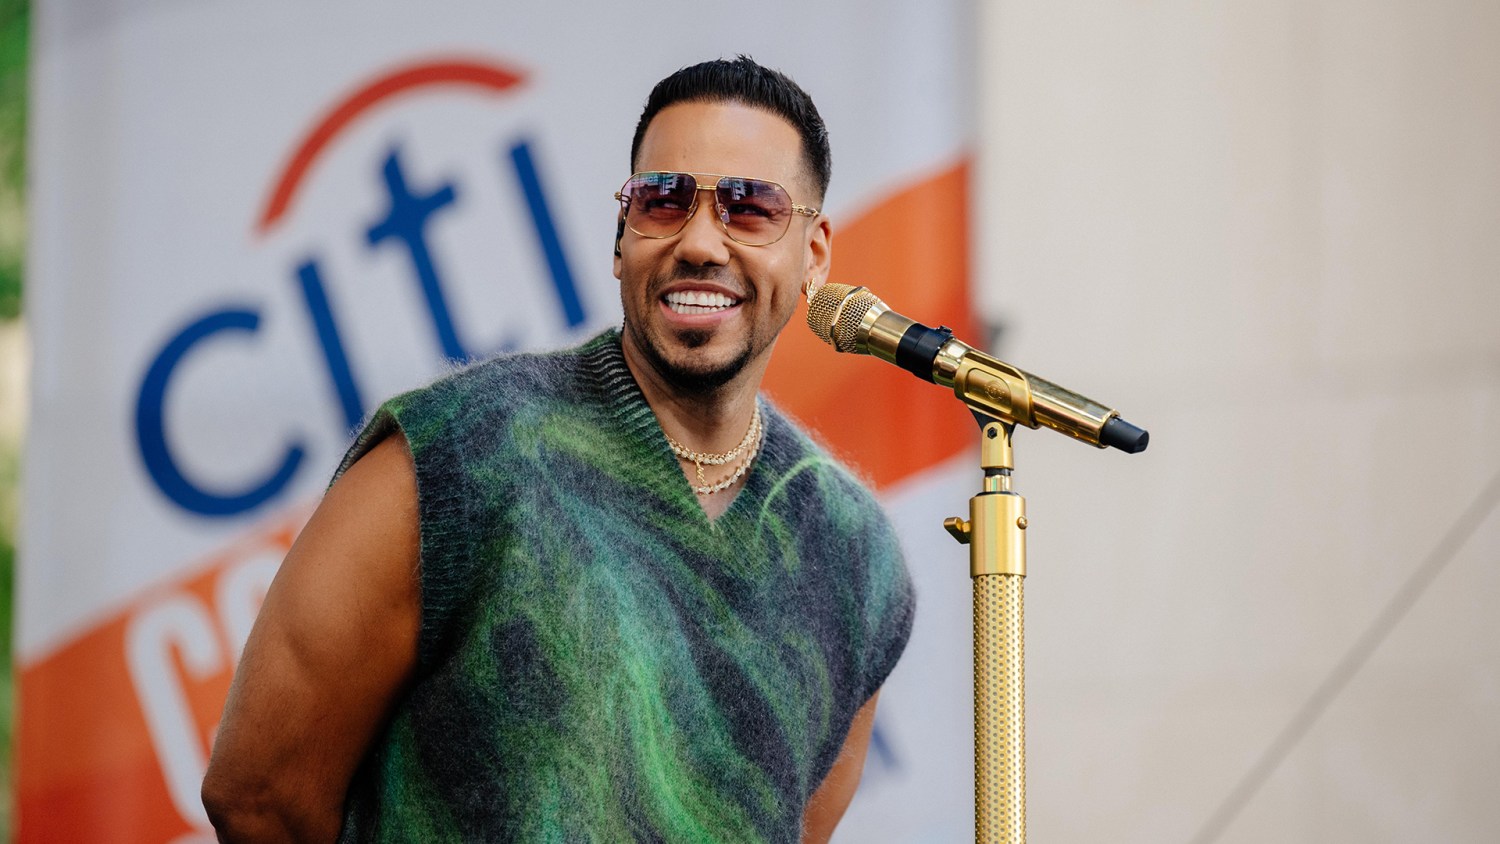 Romeo Santos is back! Singer releases new music in February